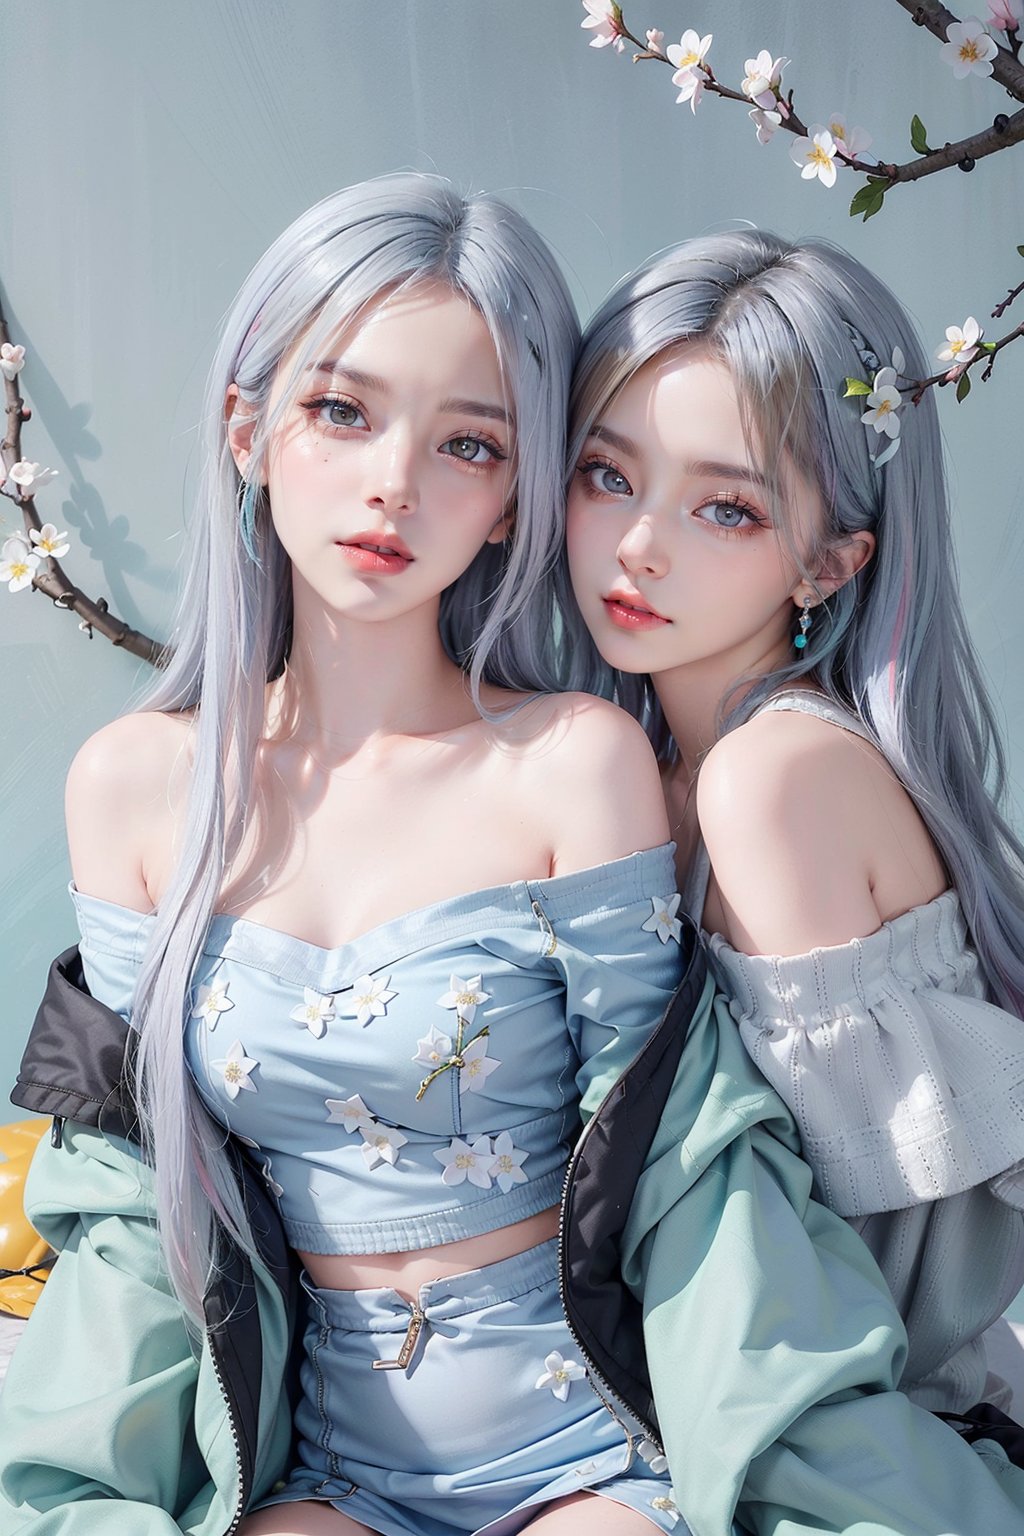 2girls, blush, blue eye, (white and blue highlight hair: 1.4), Donatella Versace designed: ((Luxurious off shoulder blue jacket)) and ((Luxurious green frock)), stylish clothing, messy_hair, (( cherry blossoms art wall background)), nervous and embarrassed expression in their face, (stylish posing), navel,medium full shot,two_girl,2girls,different_clothes